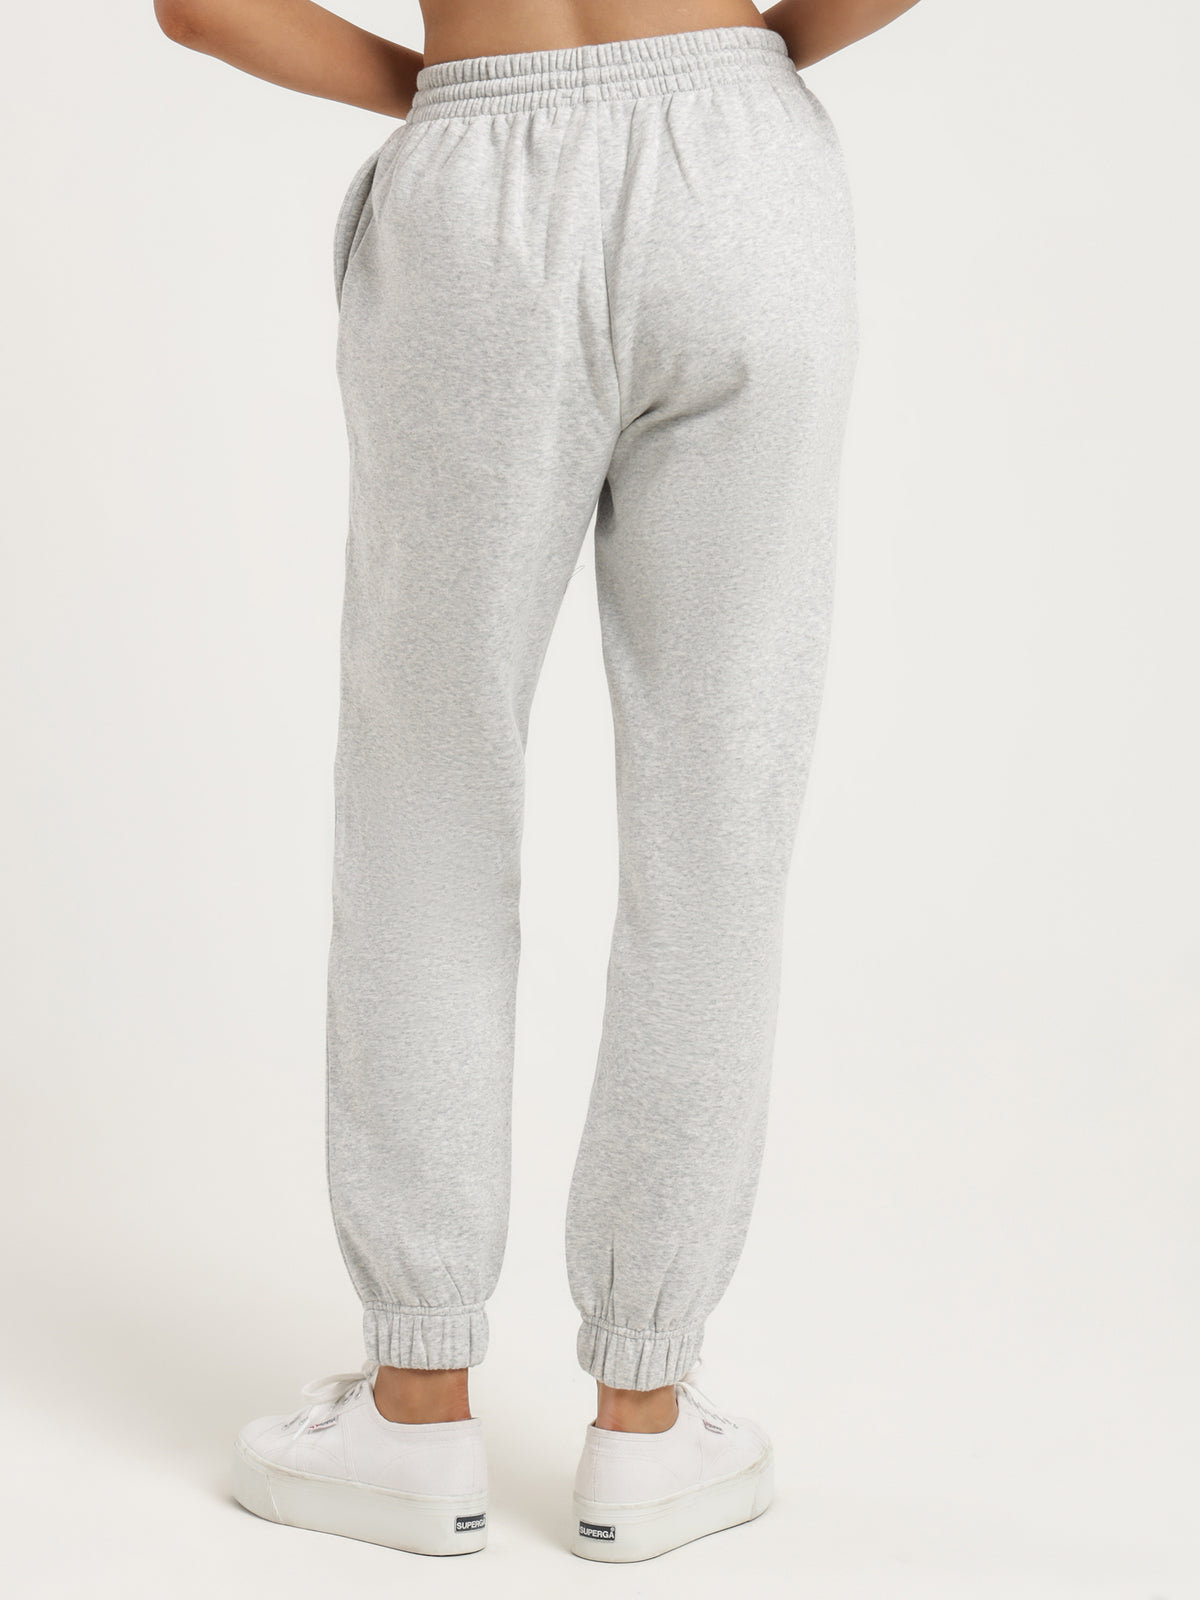 Carter Curated Trackpants in Grey Marle